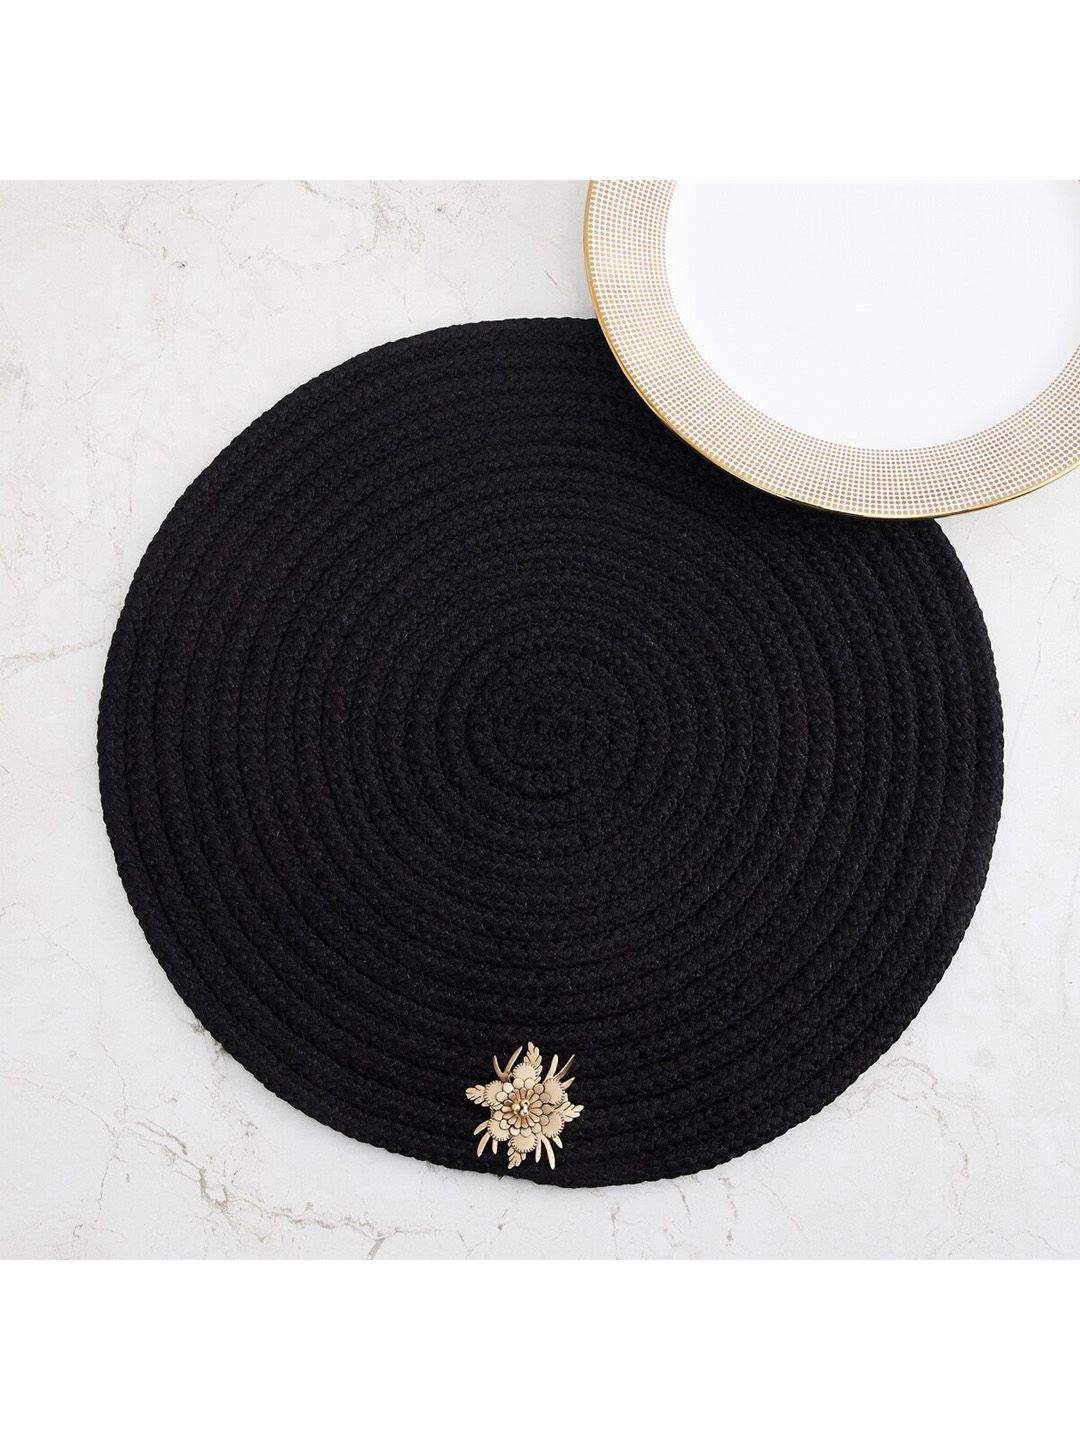 Home Centre Black Flower Textured Round Placemat Price in India